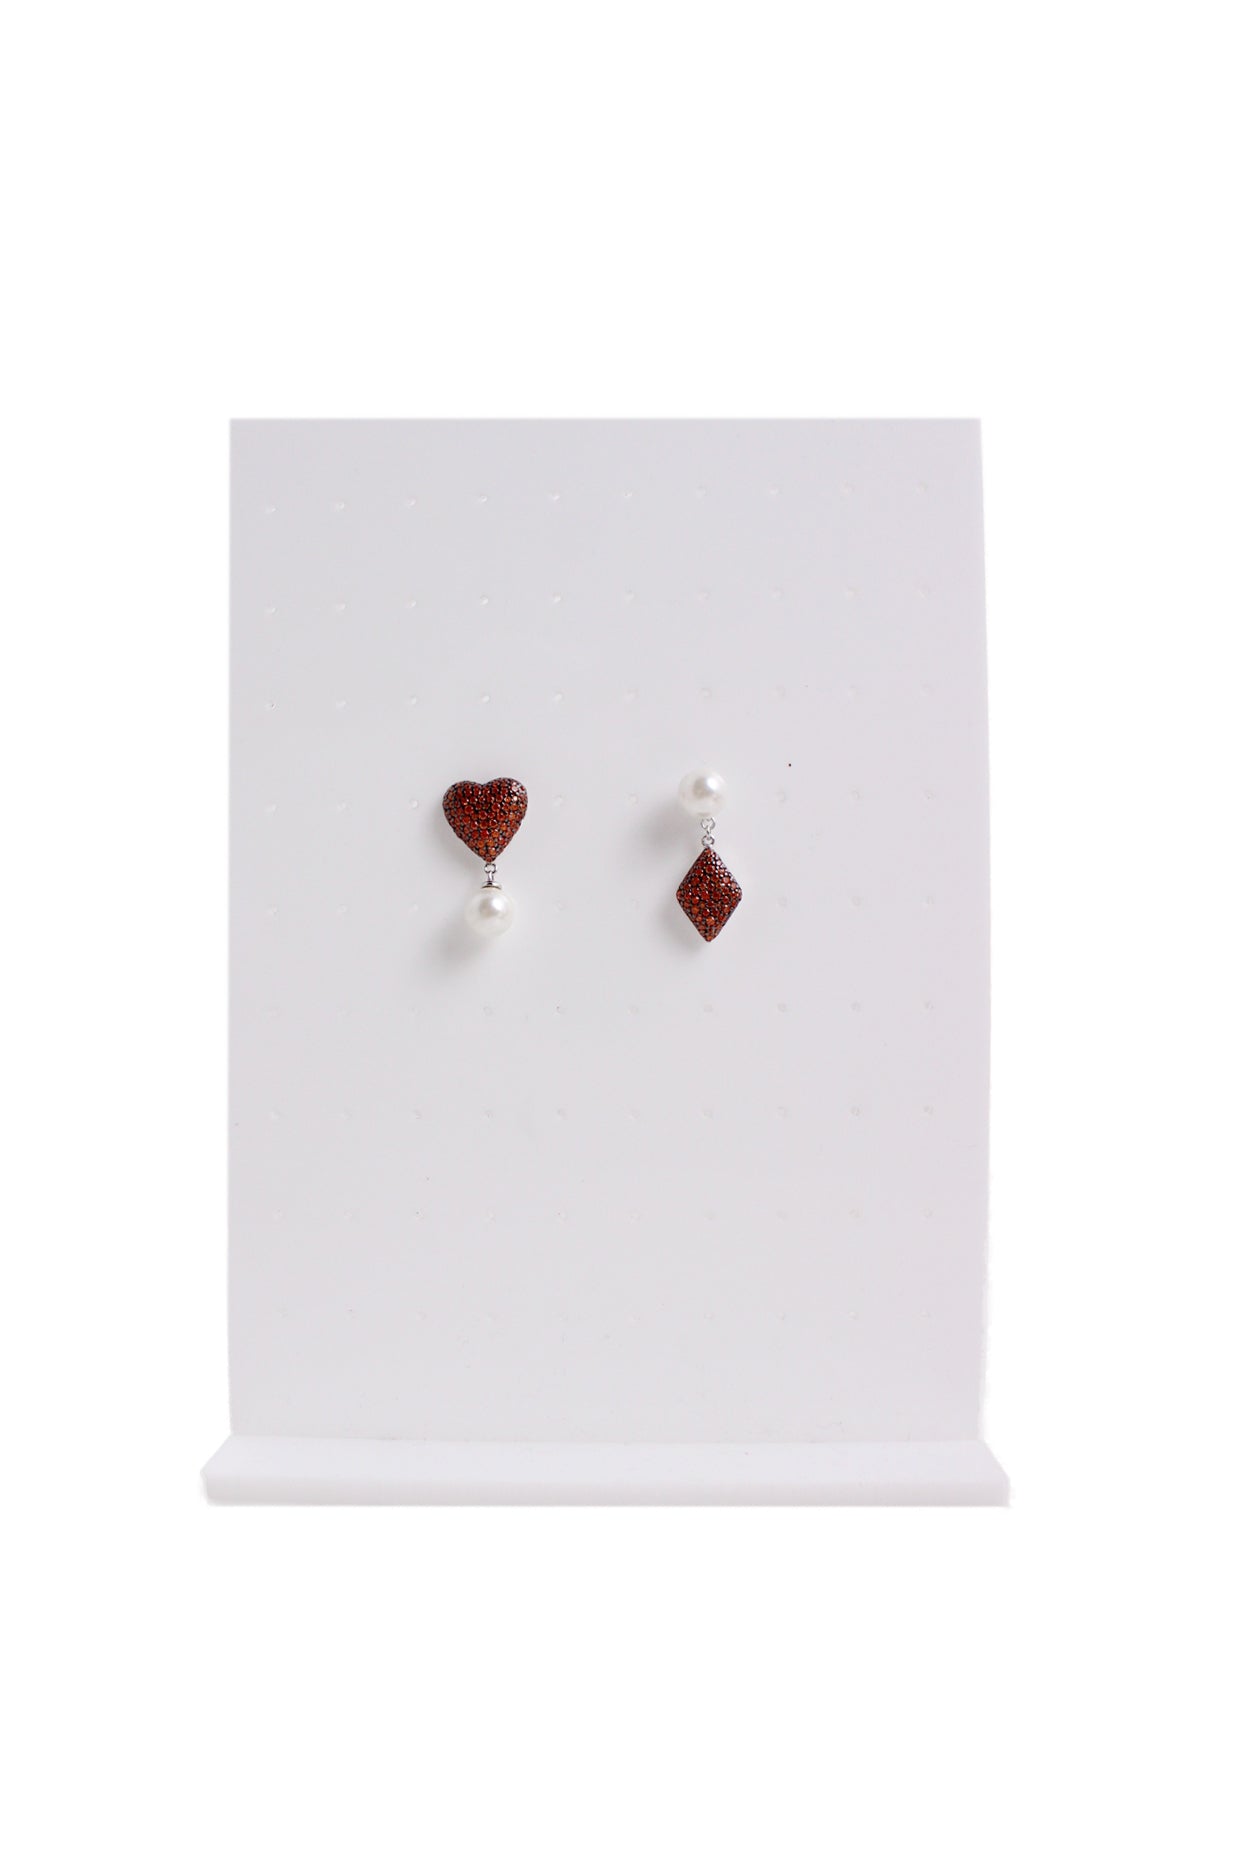 orange stoned heart and diamond shaped earrings with white pearl bead staged on an earrings stand. 